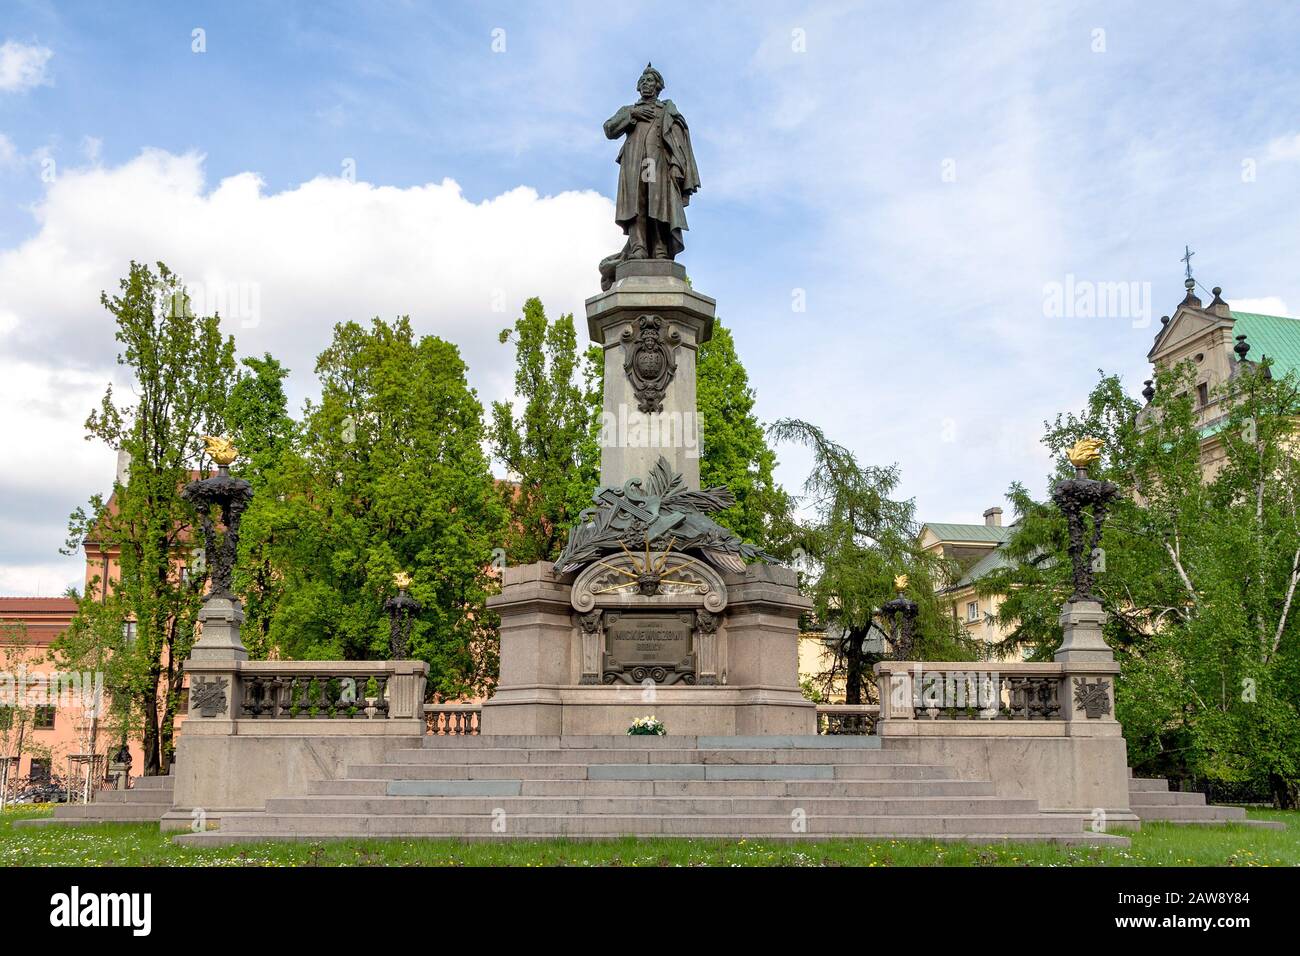 The Adam Mickiewicz Monument in Warsaw, Poland Stock Photo